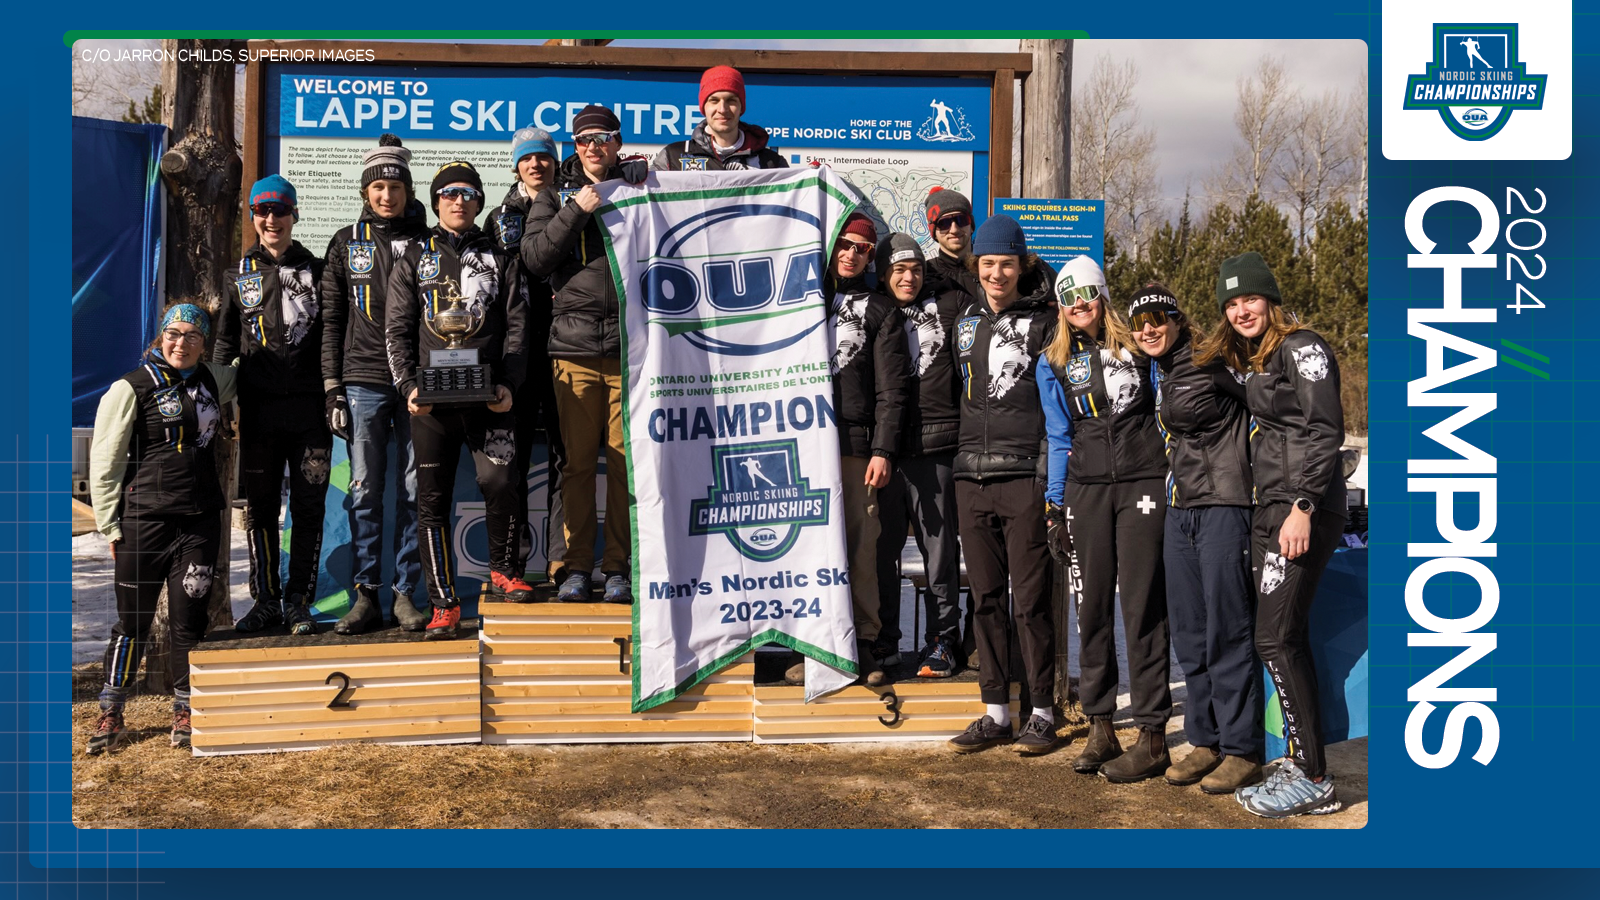 Predominantly blue graphic covered mostly by 2024 OUA Men's Nordic Skiing Championship banner photo, with the corresponding championship logo and white text reading '2024 Champions' on the right side